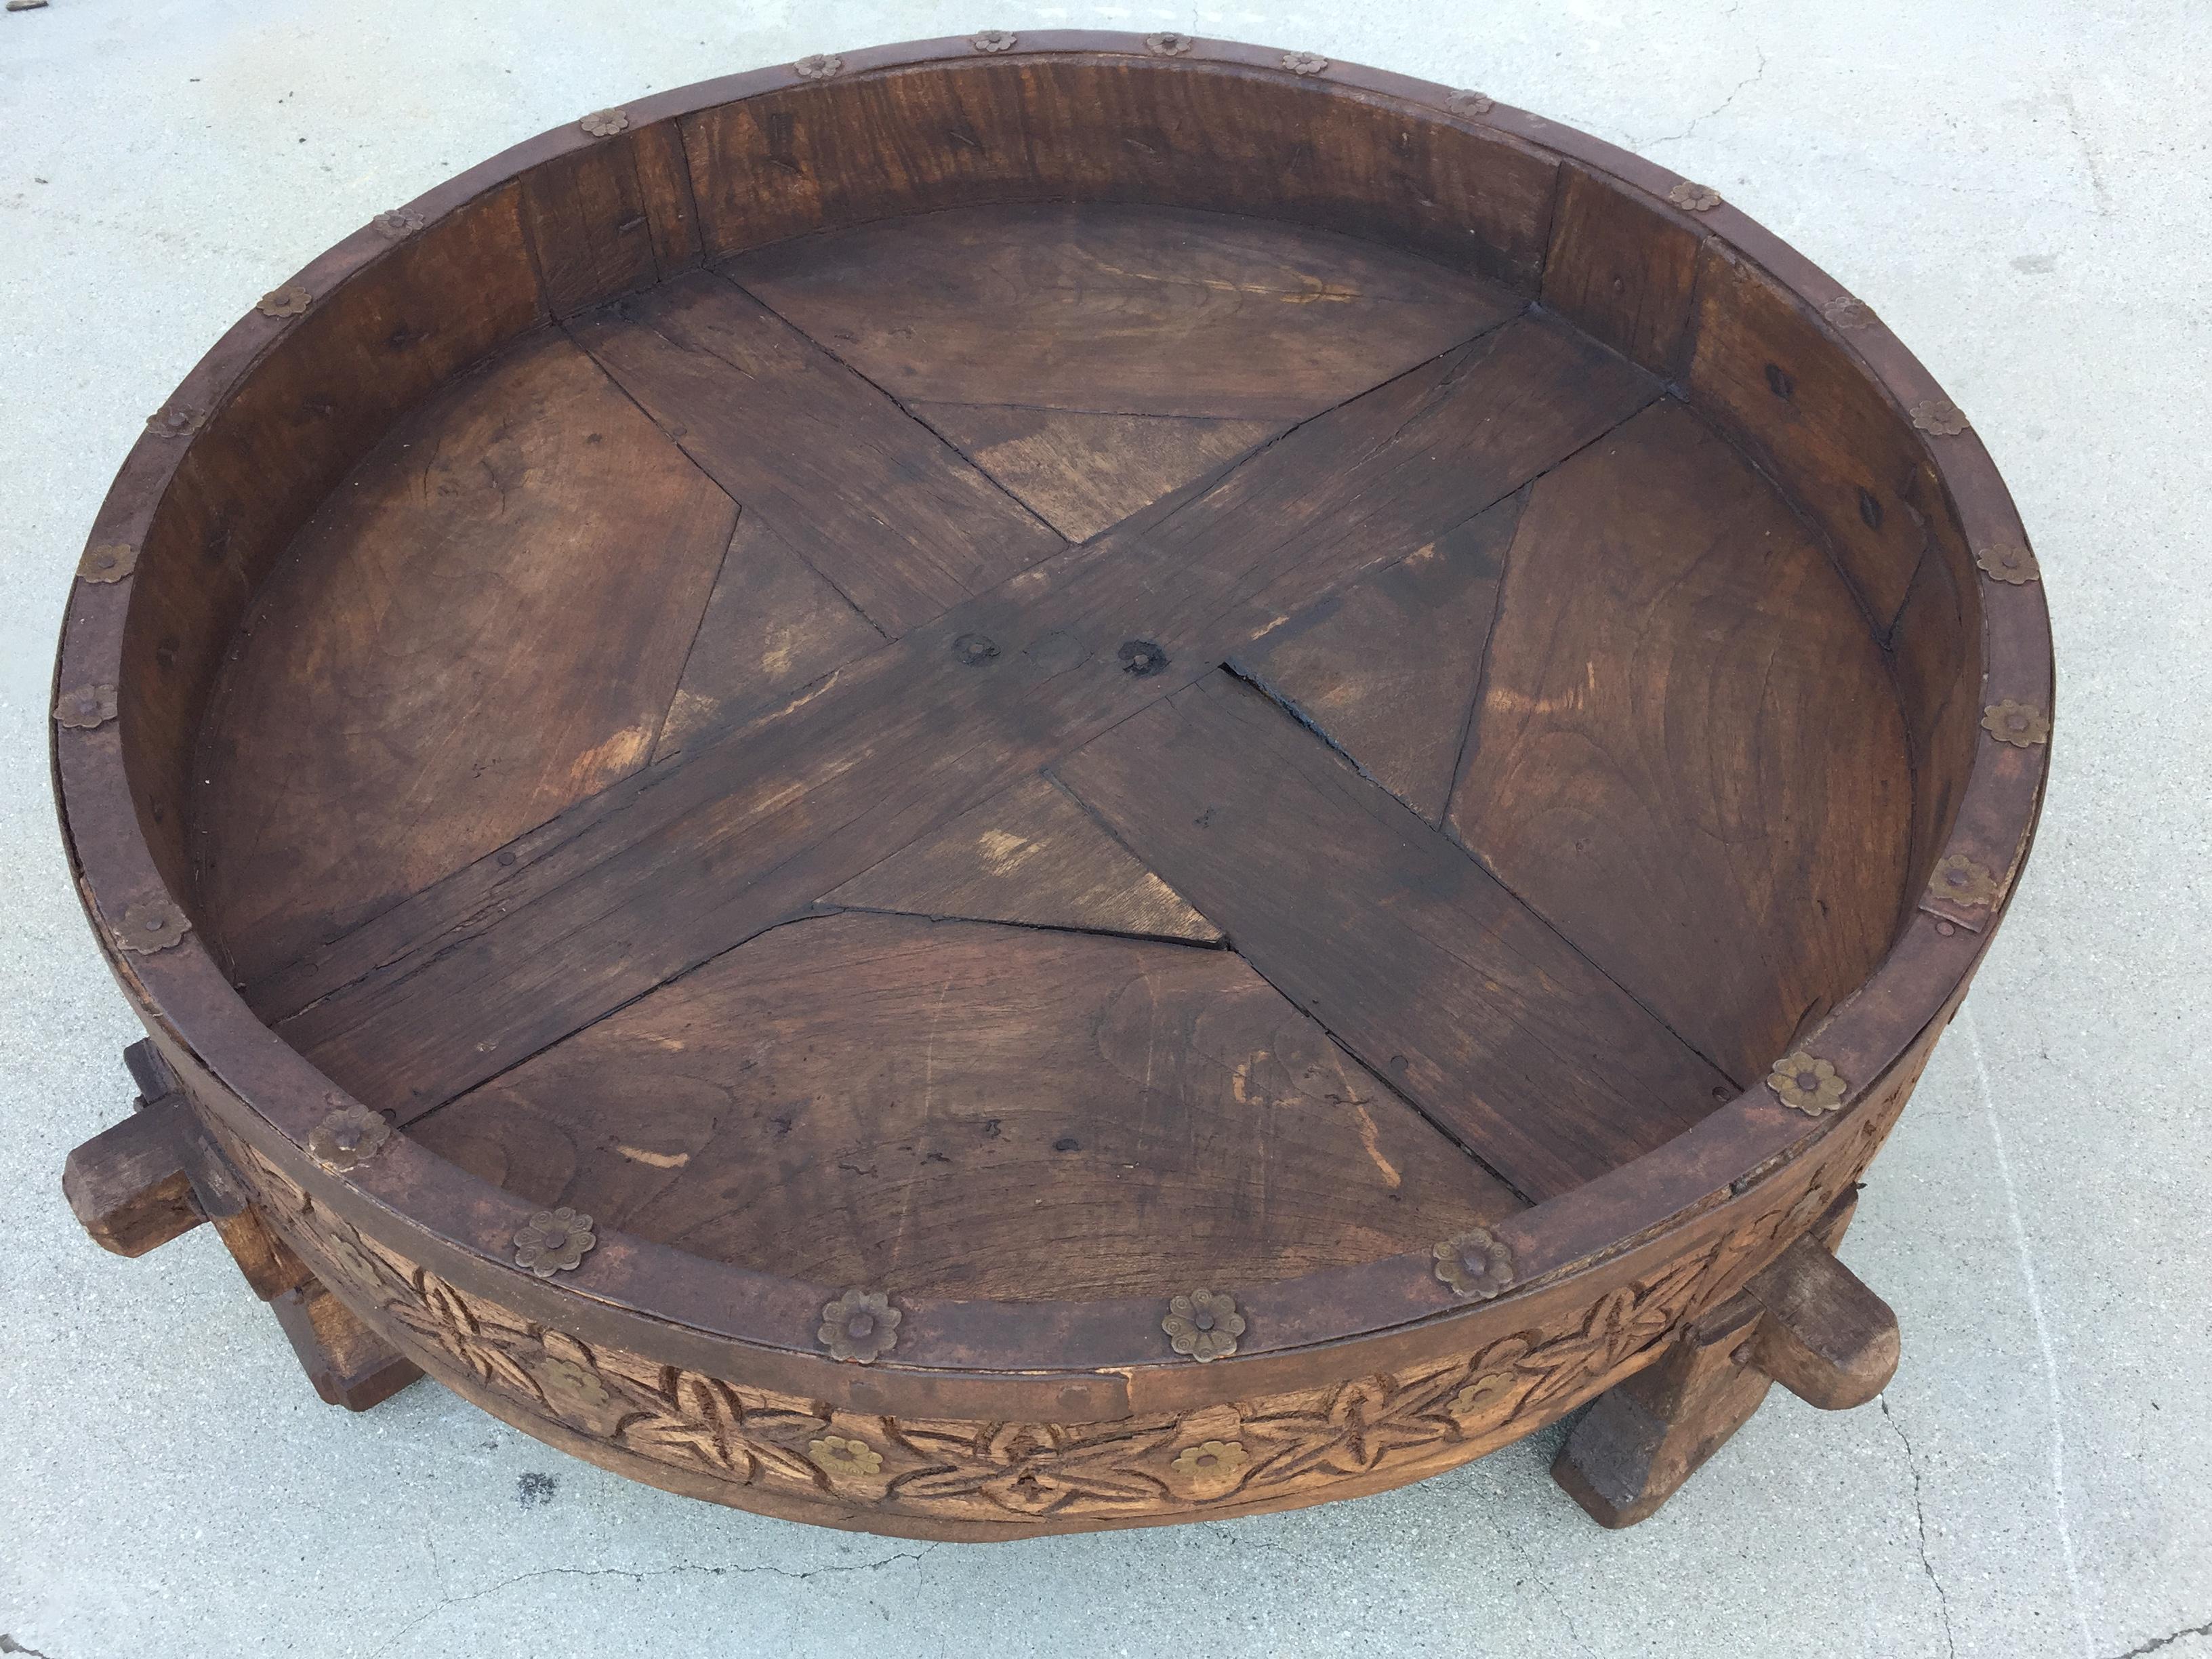 Large antique hand carved wood Indian grinder tribal teak table.
Dark walnut color hand carved with geometric African design.
Handcrafted of wood and iron, hand carved with geometric Ethnic tribal design.
Very sturdy rustic wood table with nice